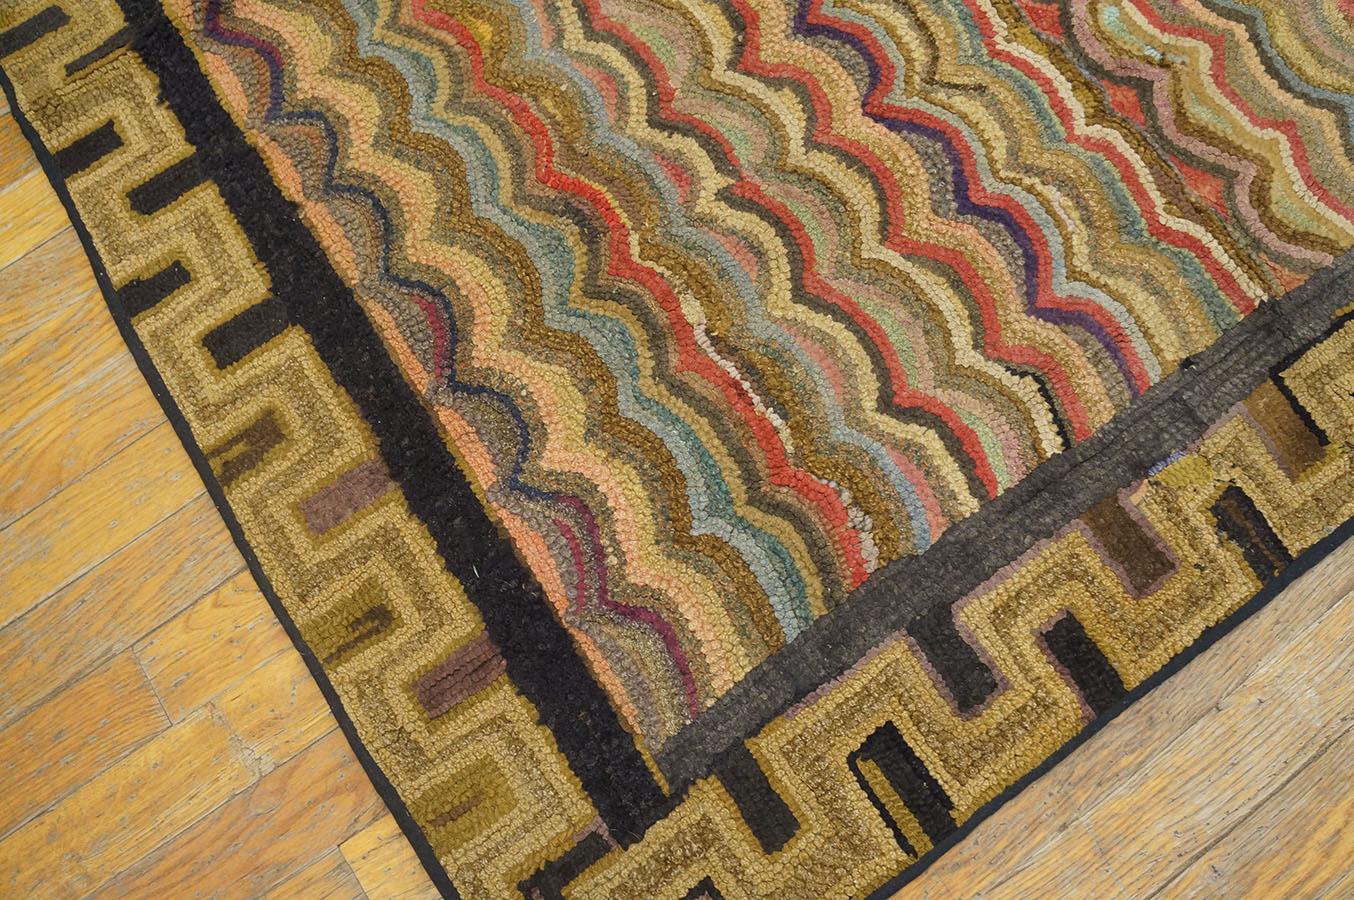 Hand-Woven Antique American Hooked Rug 4'2